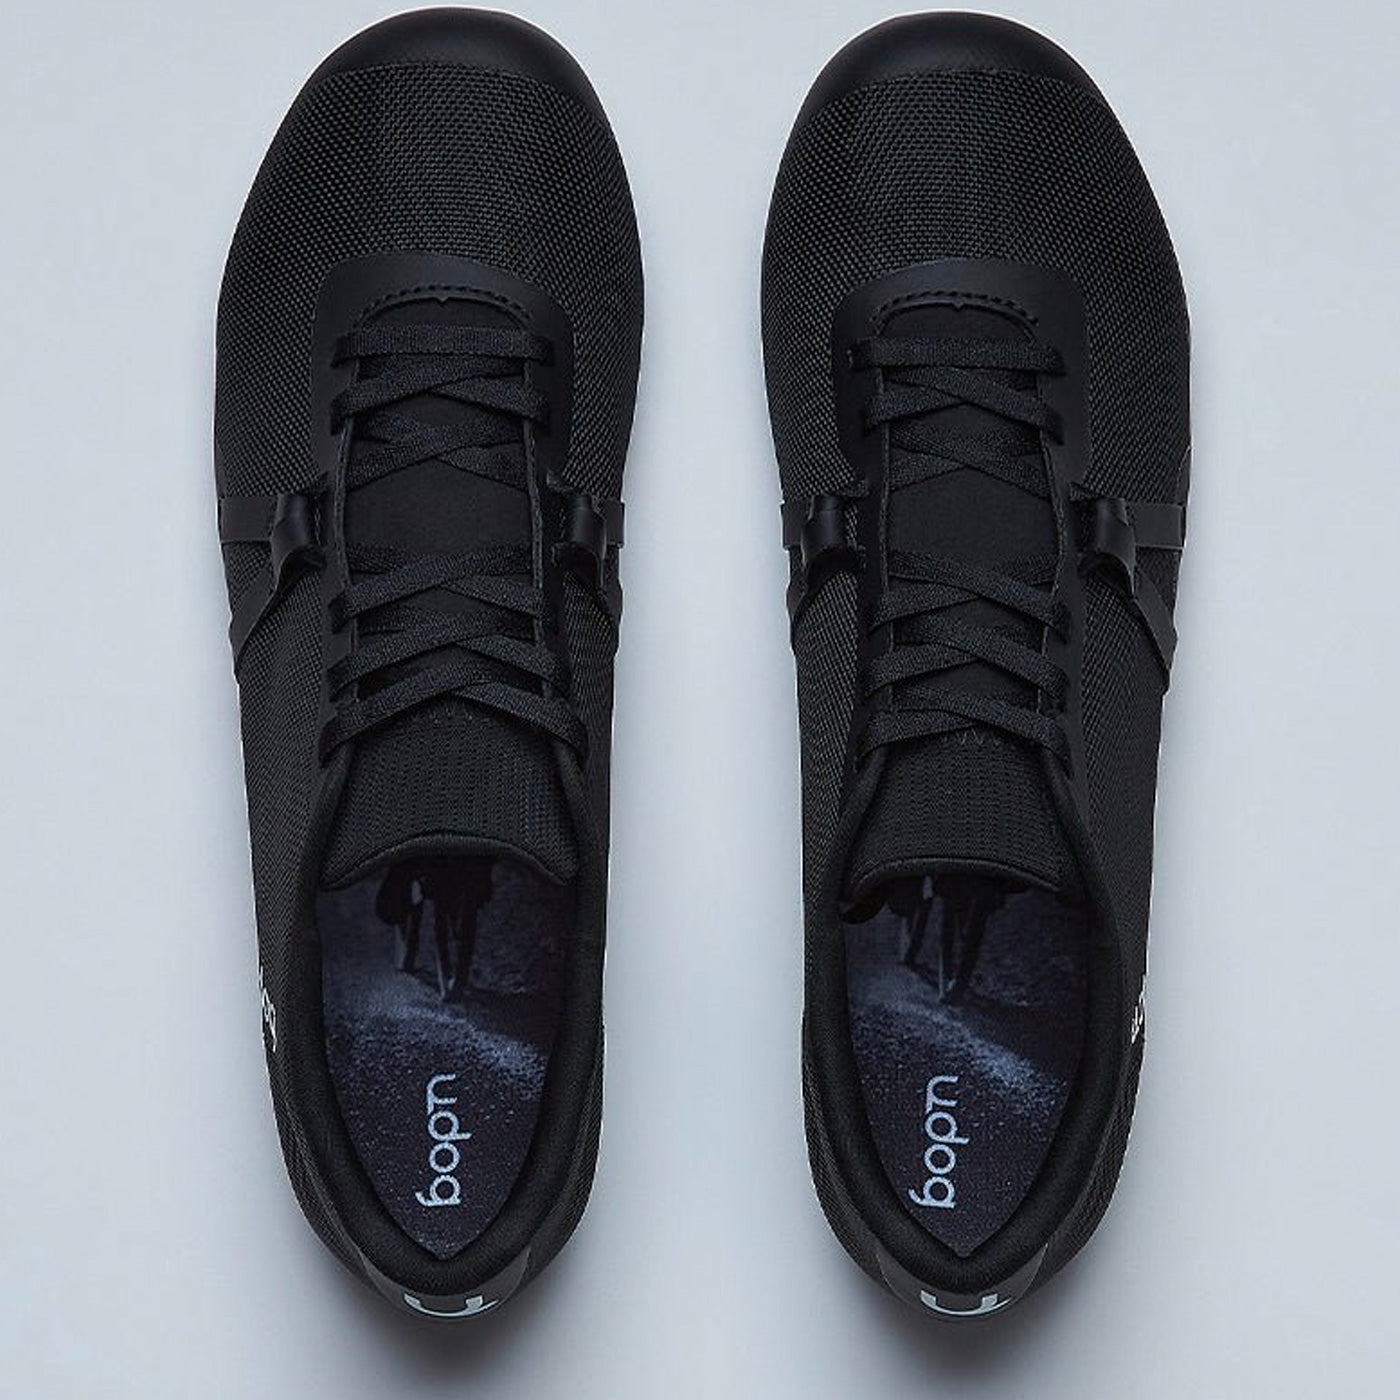 Chaussures Udog Tension - Noir